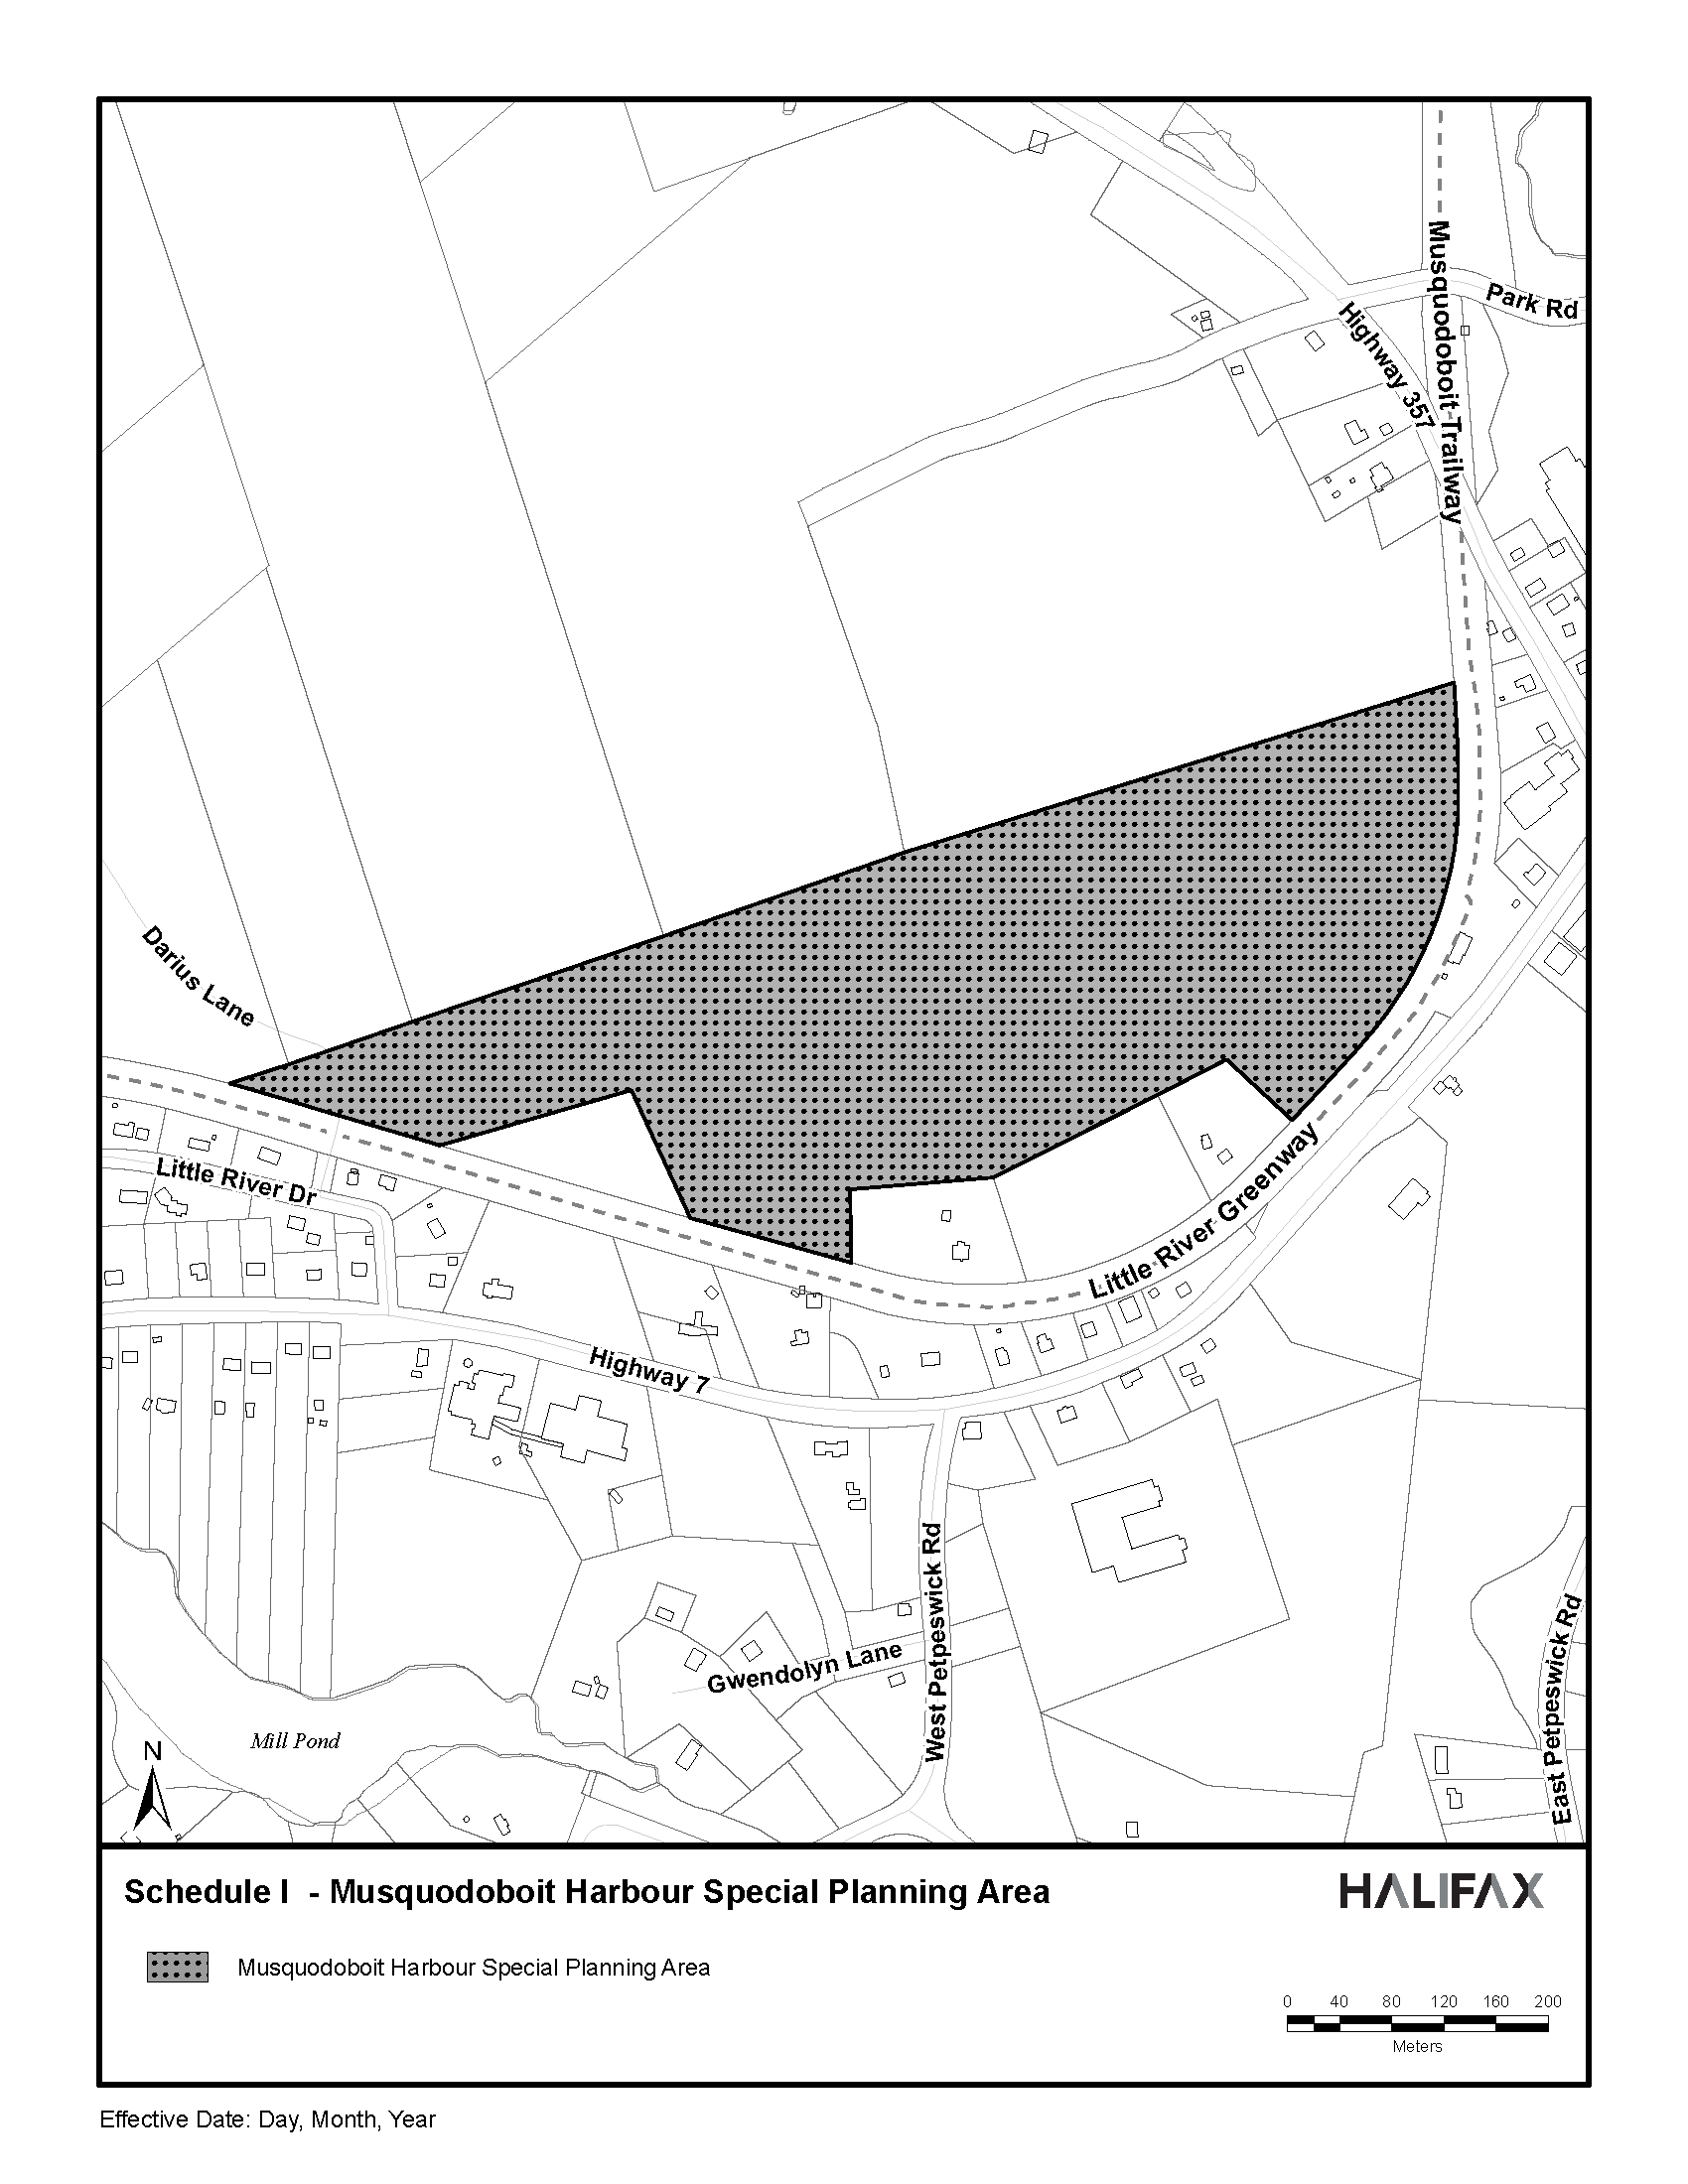 Map of Musquodoboit Harbour Special Planning Area